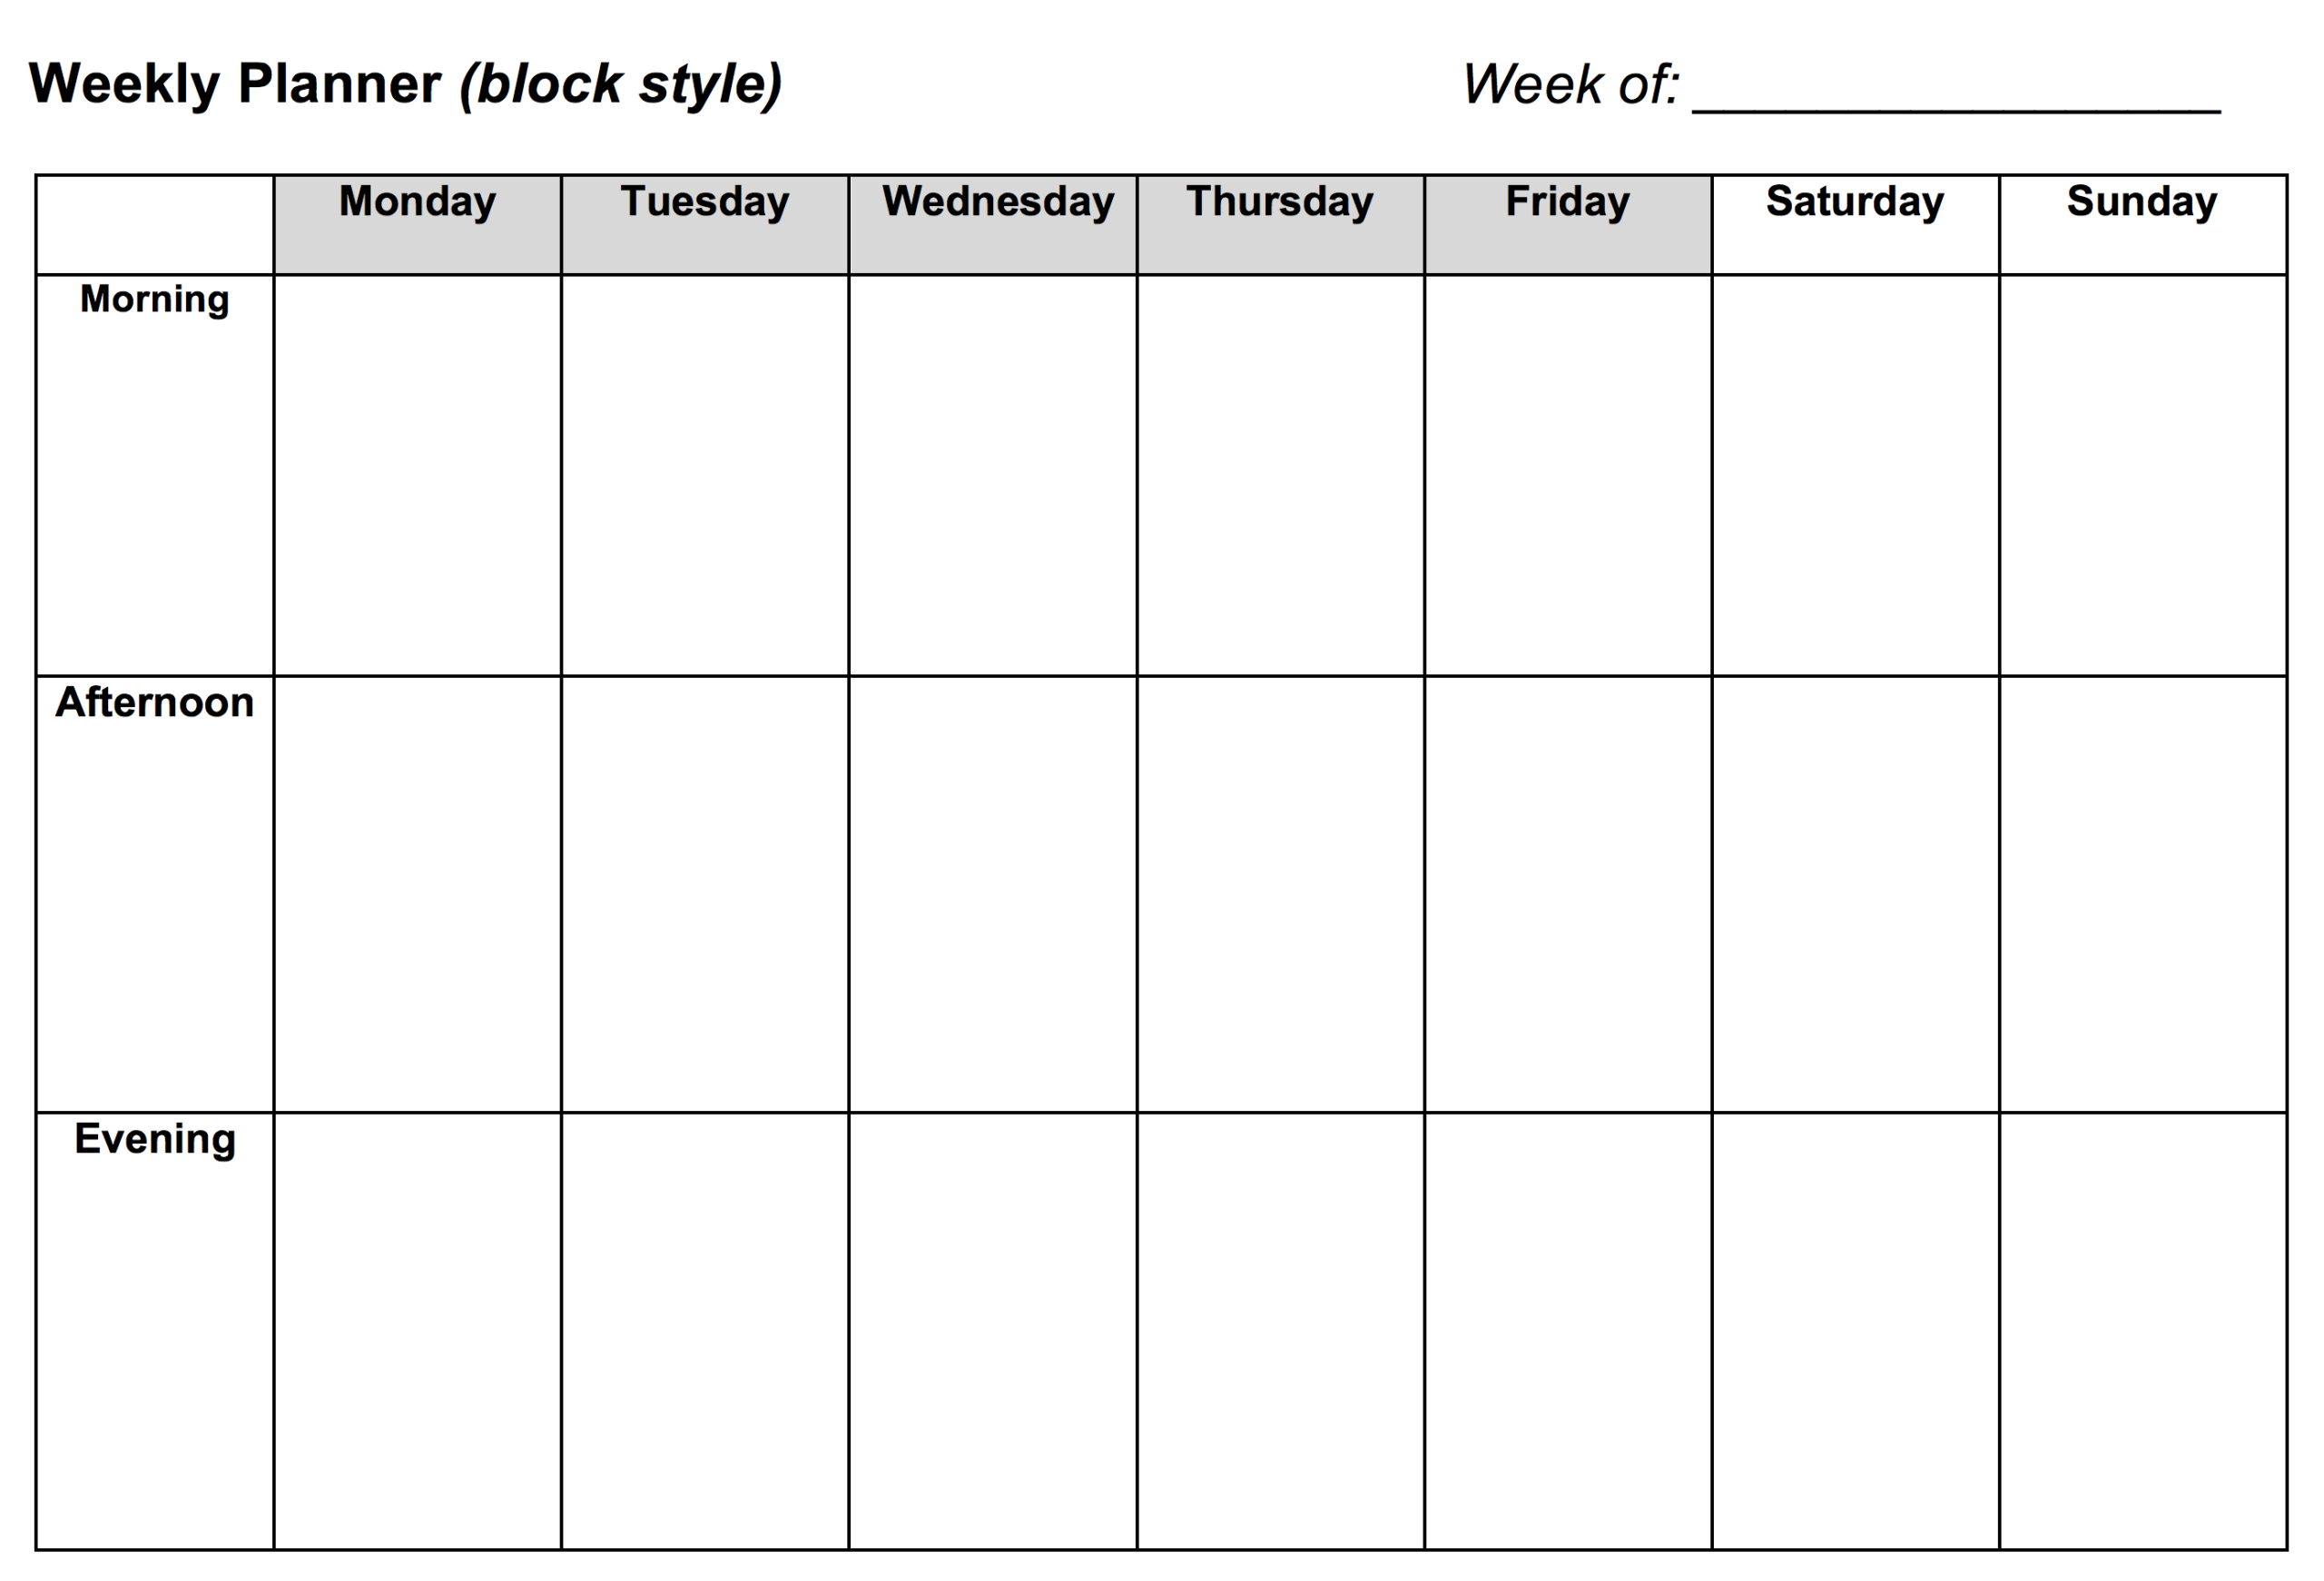 Preview Of The Weekly Planner Block Style Document That